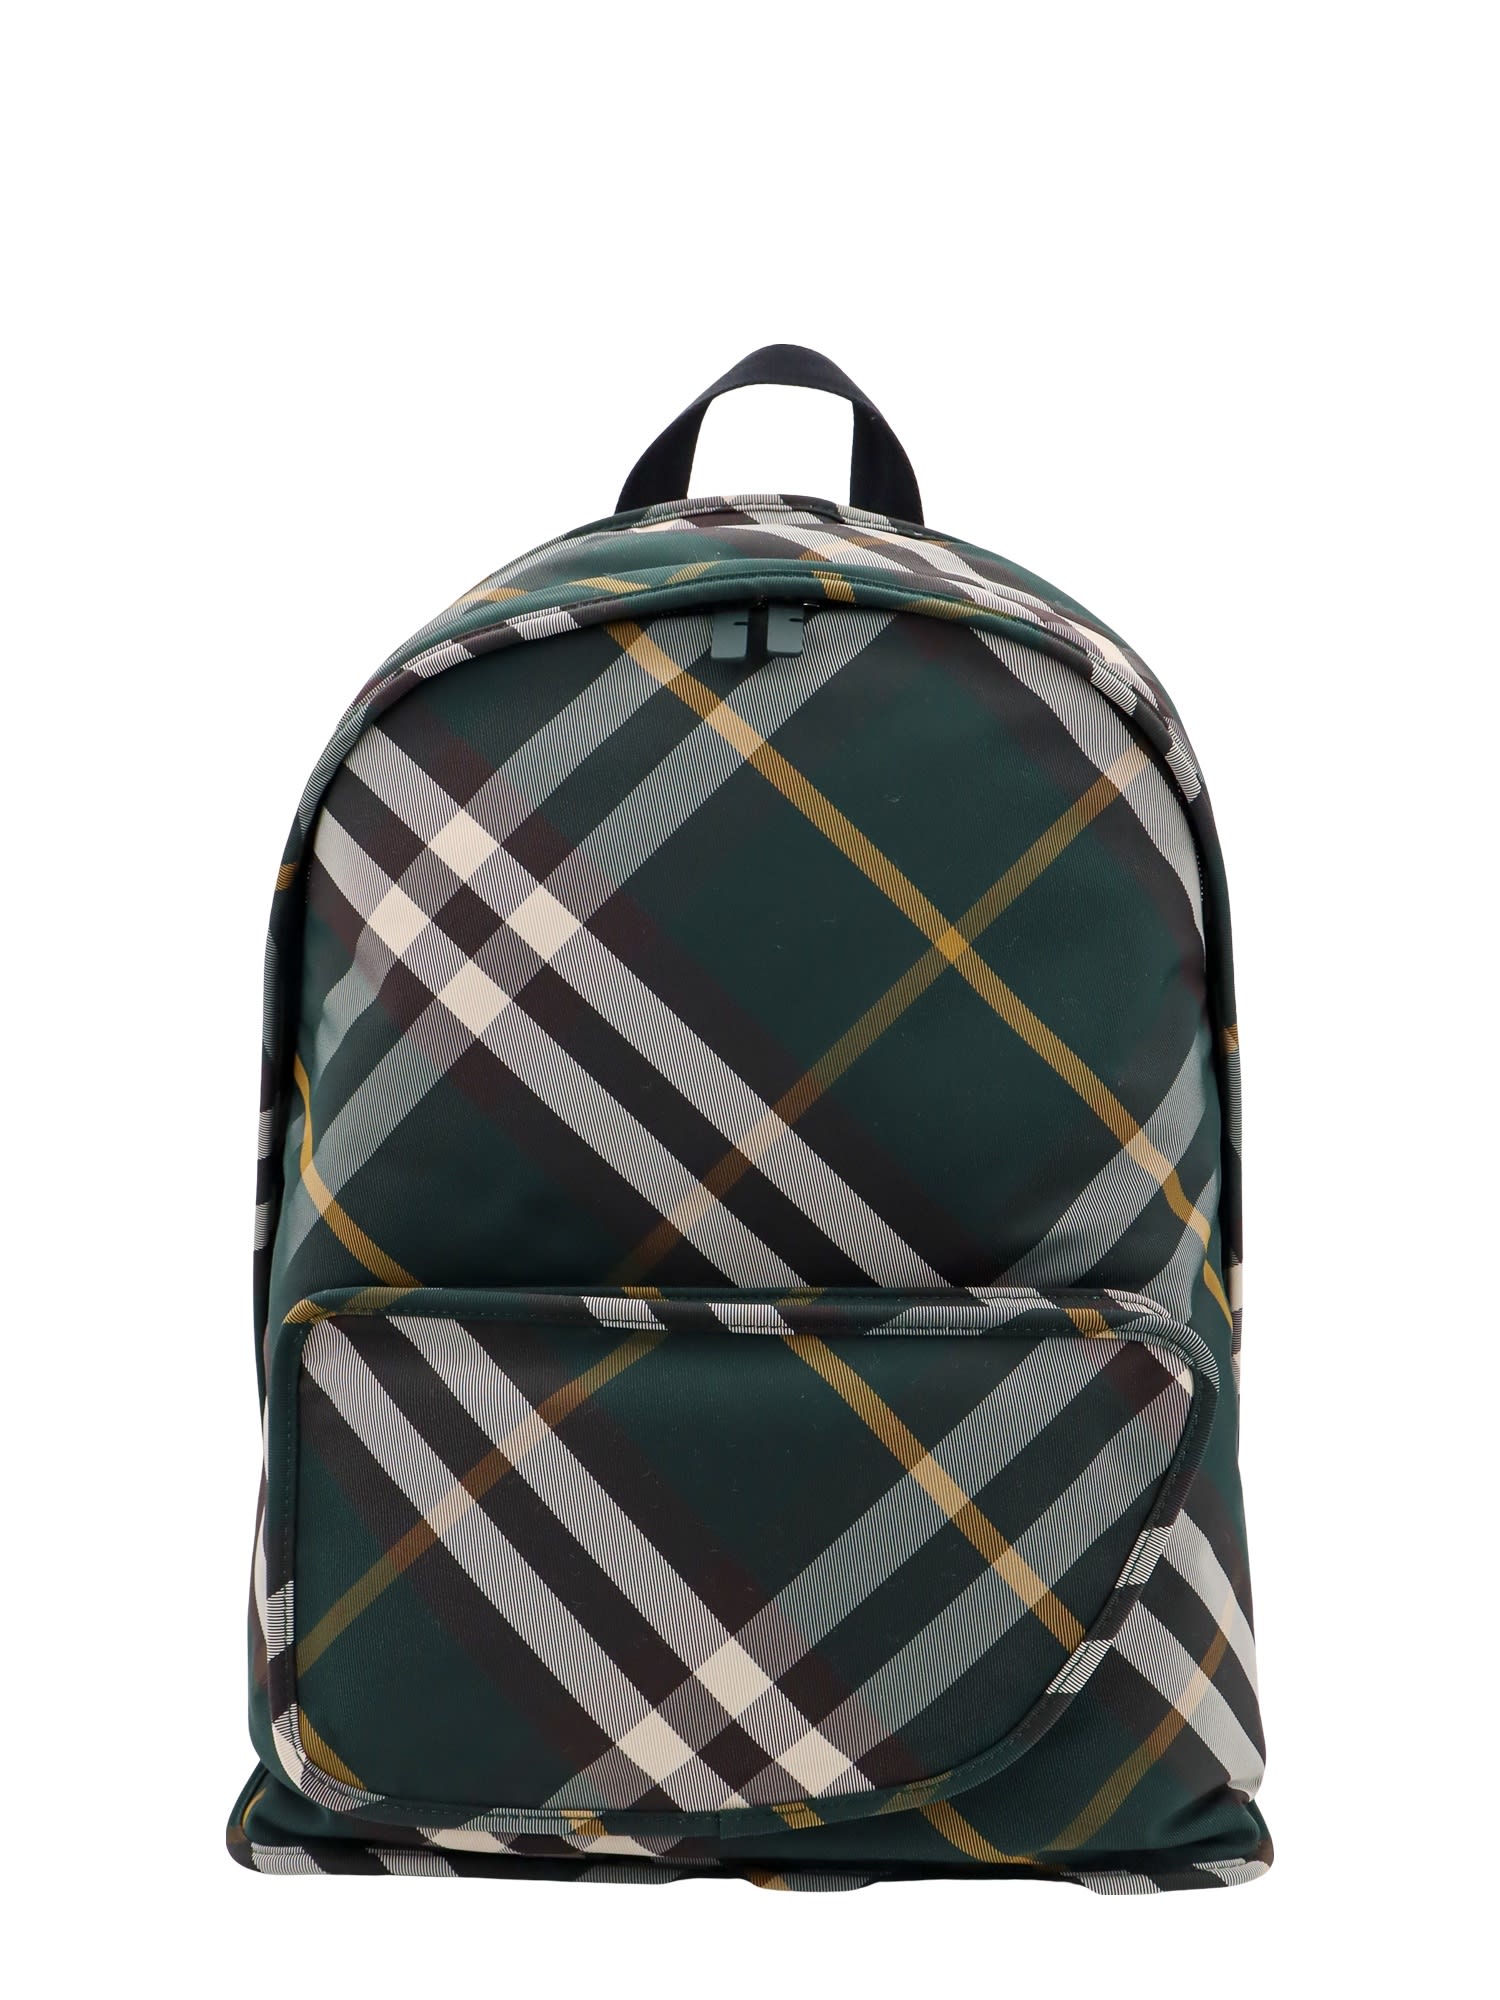 Burberry Backpack In Ivy